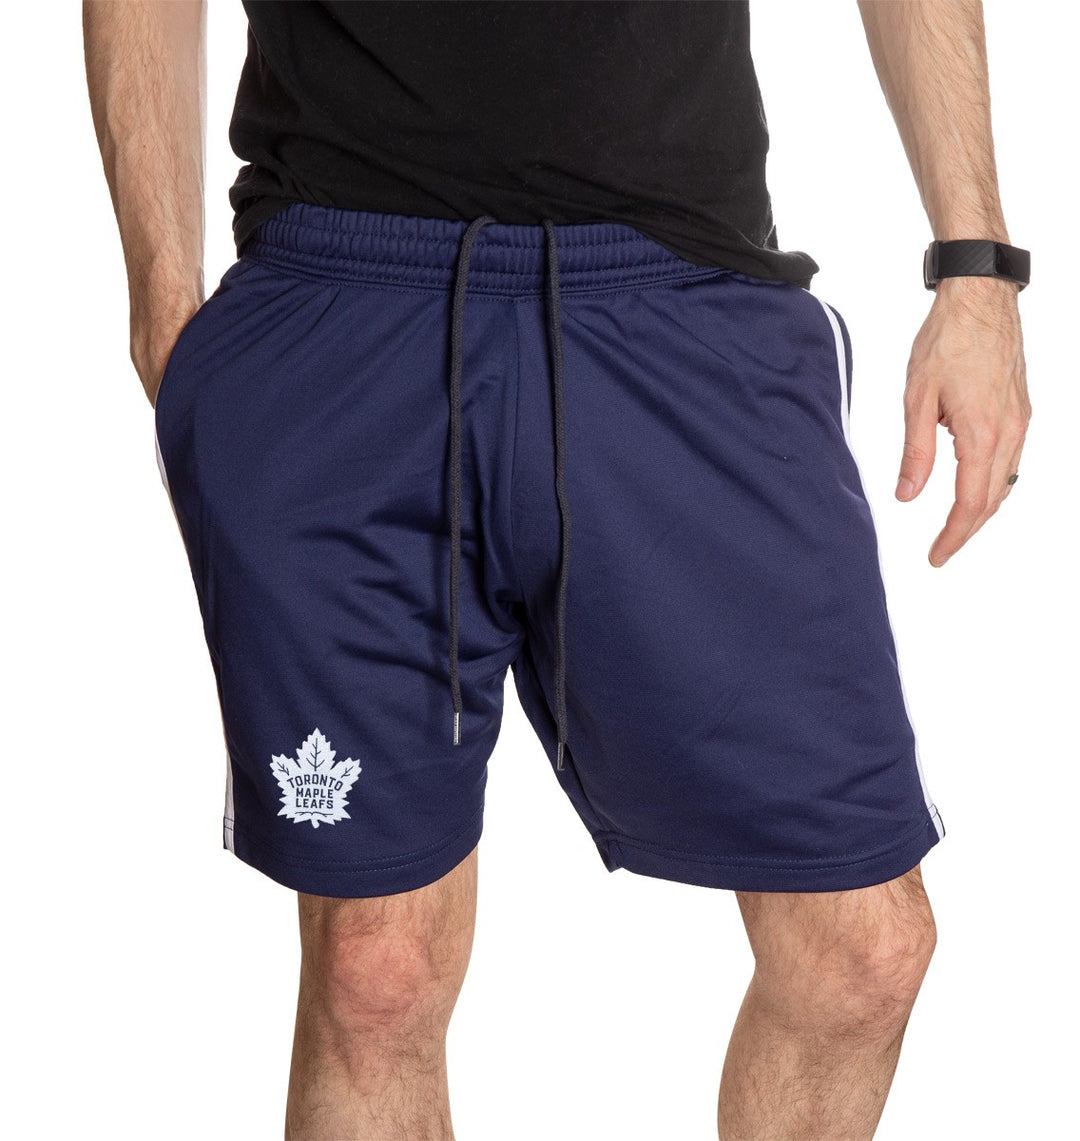 NHL Mens Official Team Two-Stripe Shorts- Toronto Maple Leafs Full Front View Of Man Wearing Shorts With Hand In Pocket 